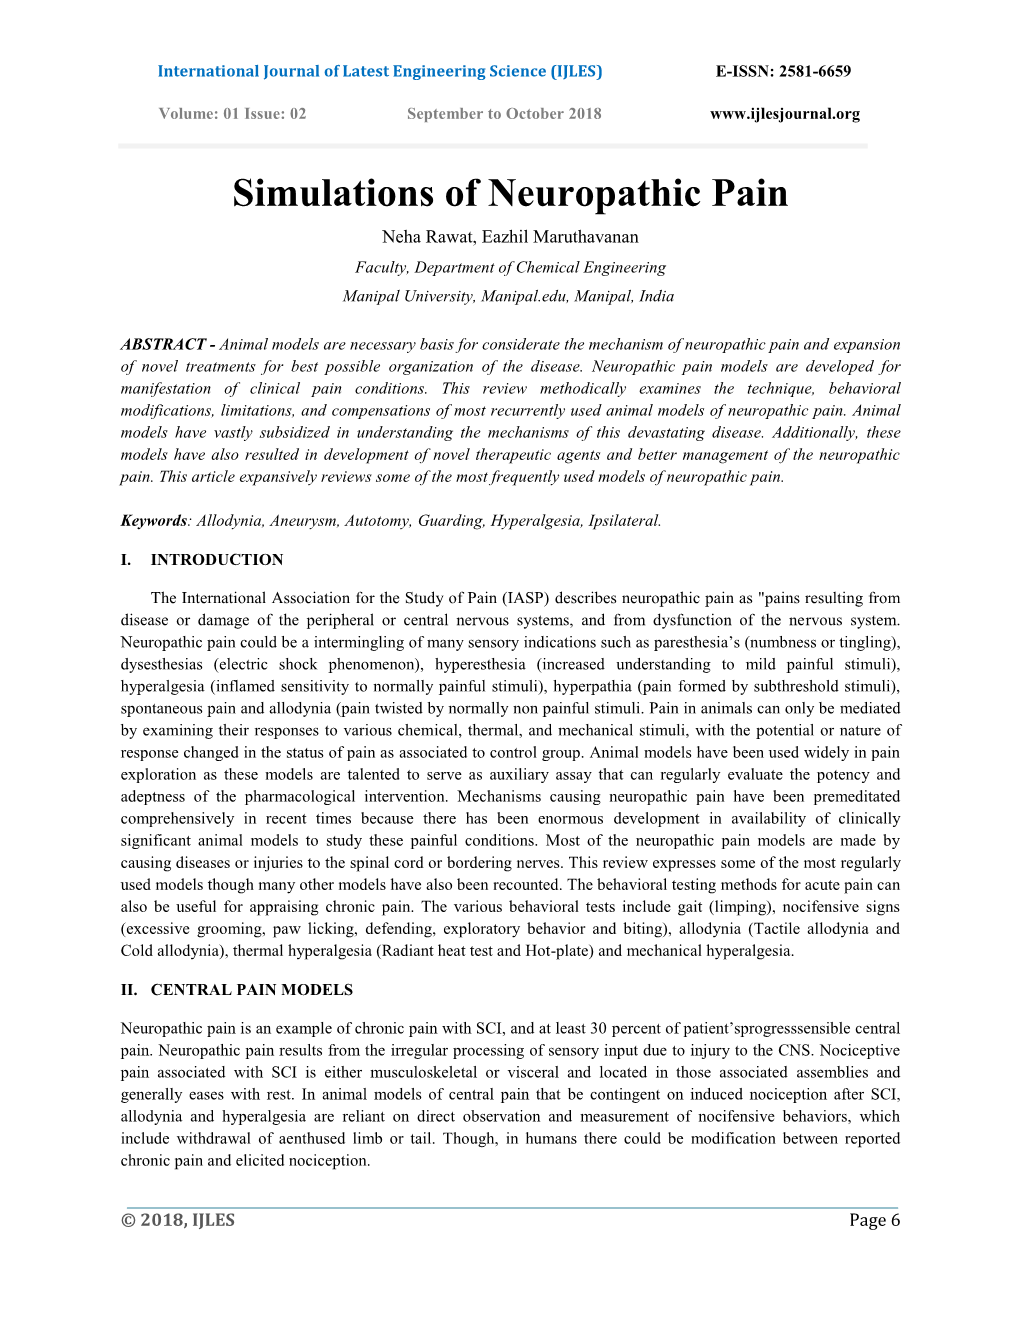 Simulations of Neuropathic Pain